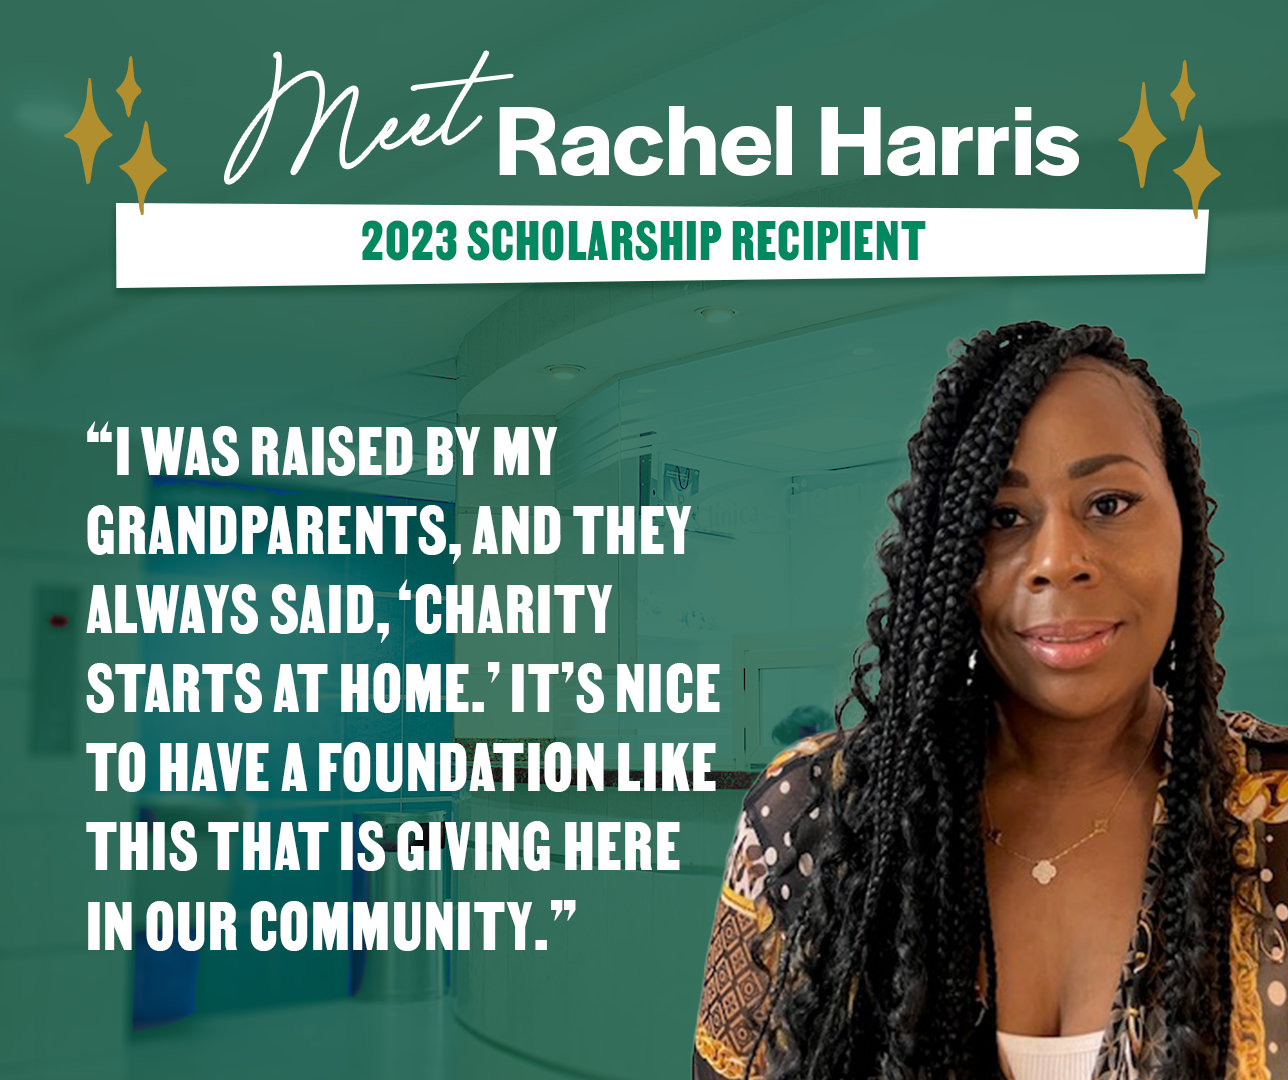 Meet Rachel Harris: 2023 Scholarship Recipient 'I was raised by my grandparents, and they always said, 